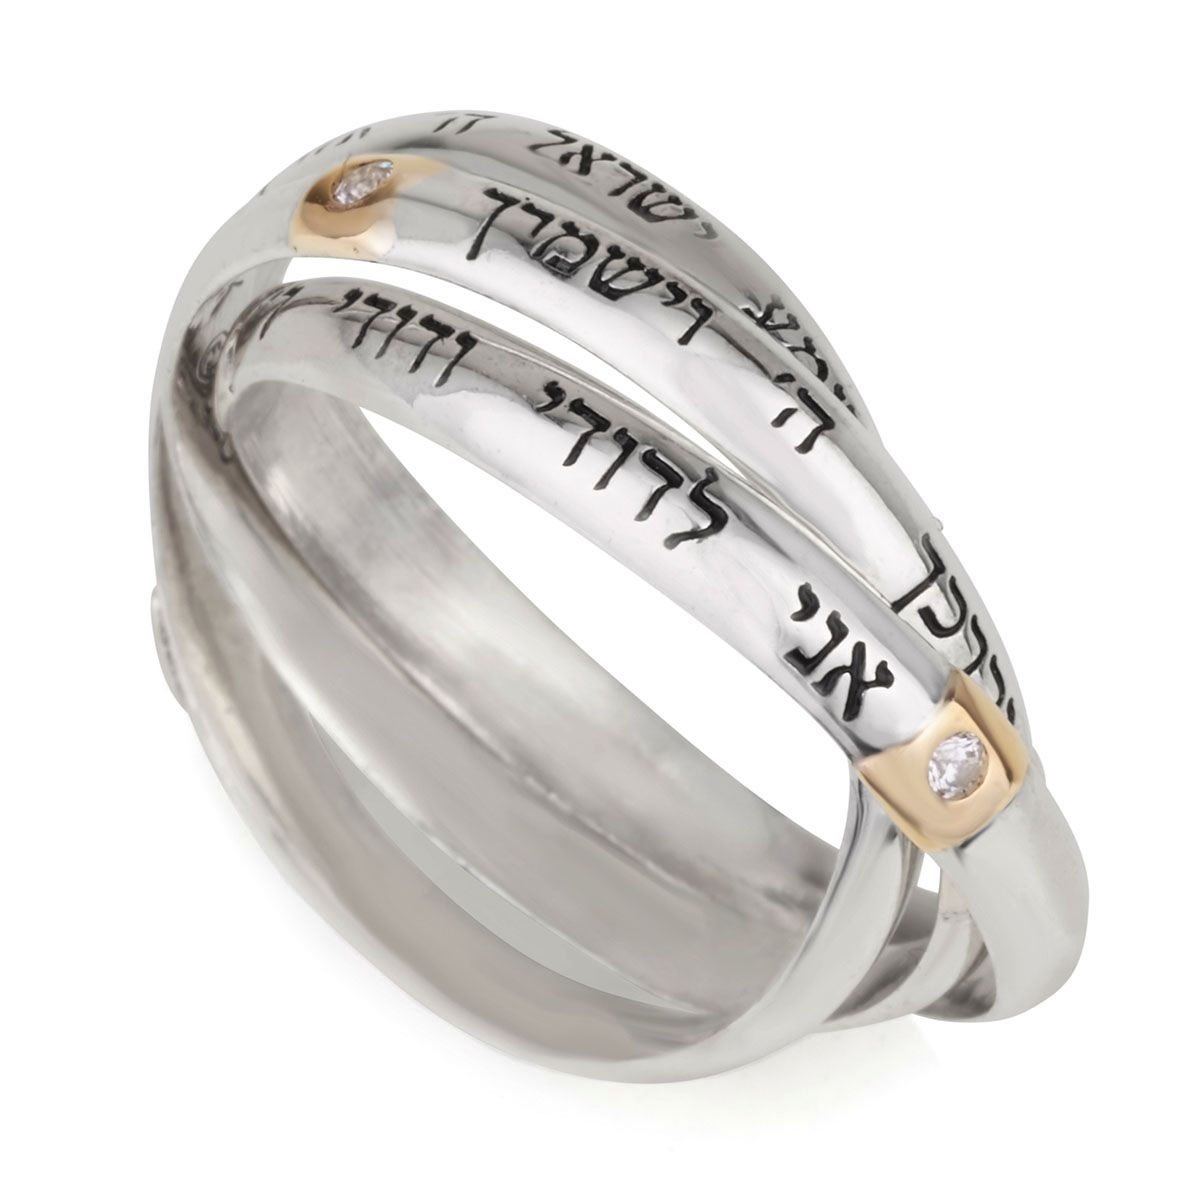 Luxurious Sterling Silver Ring With Jewish Verses - 1